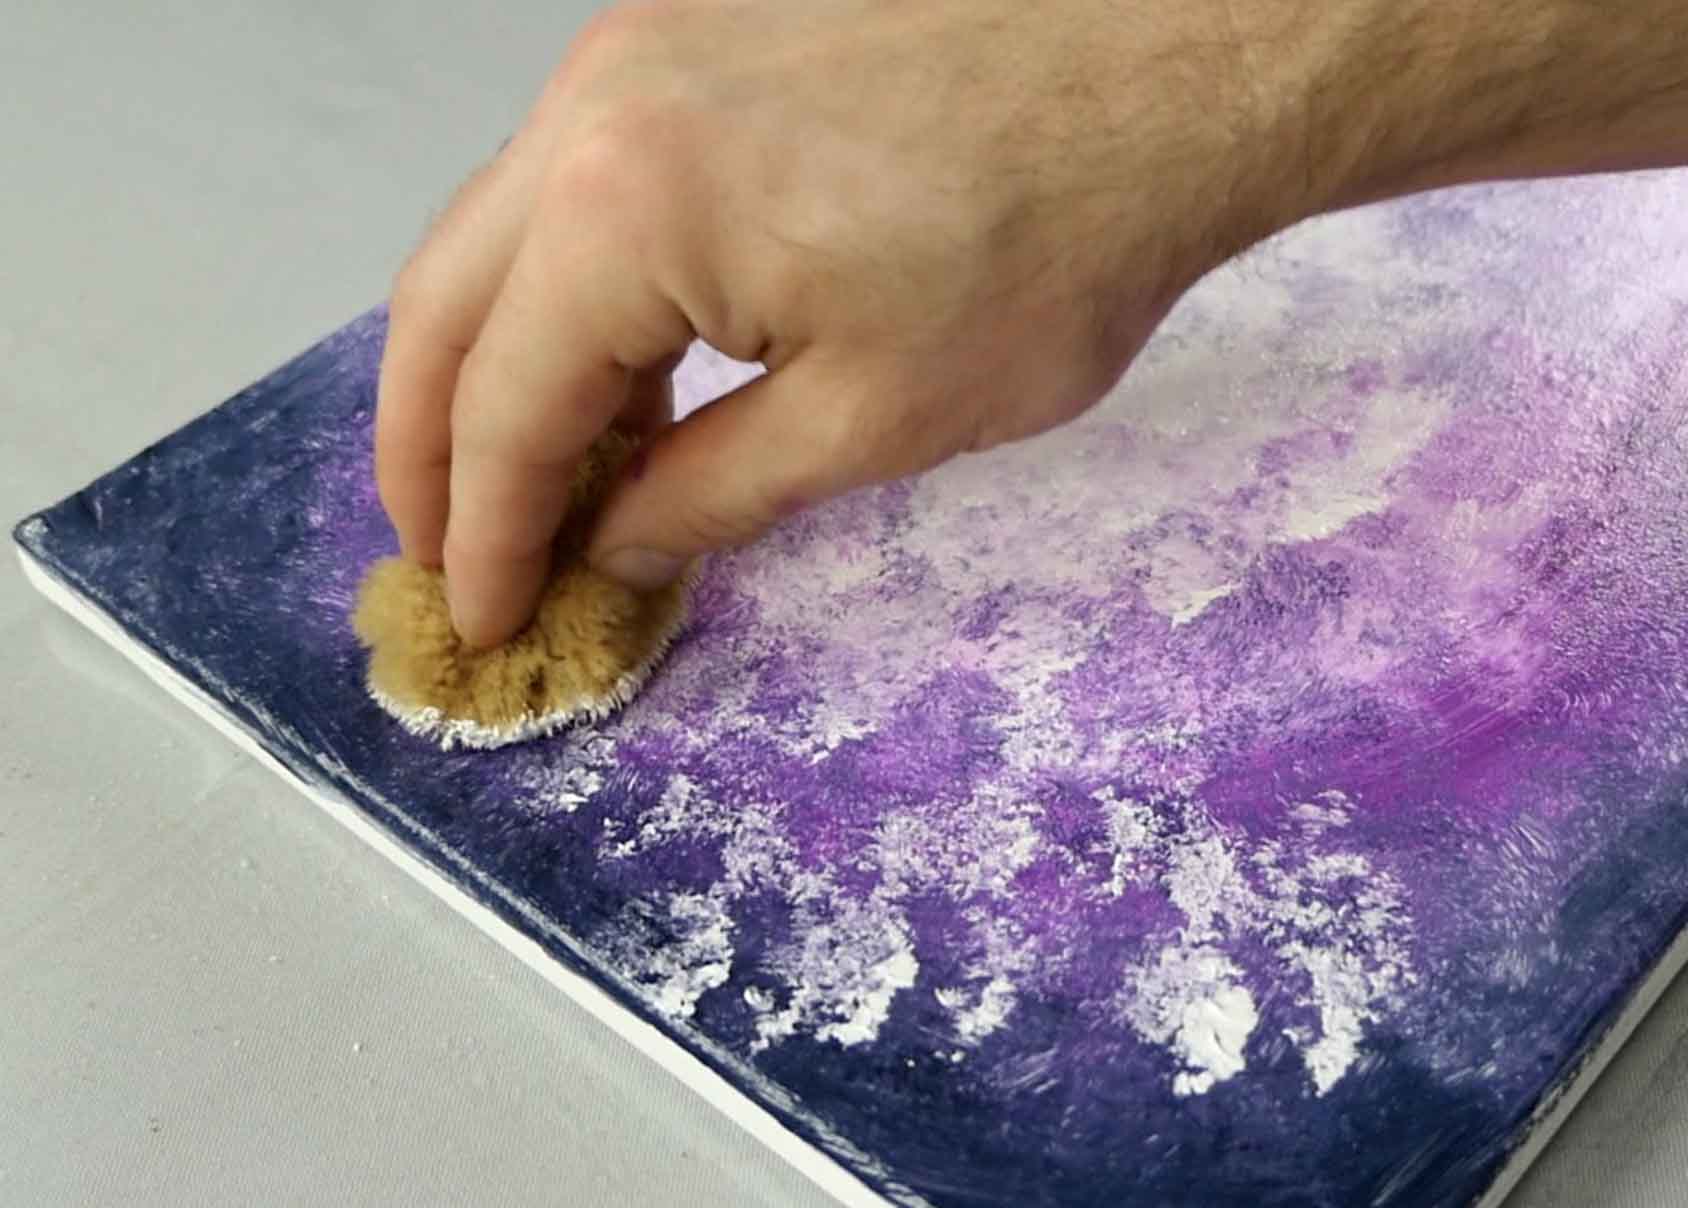 PAINTING WITH A SPONGE